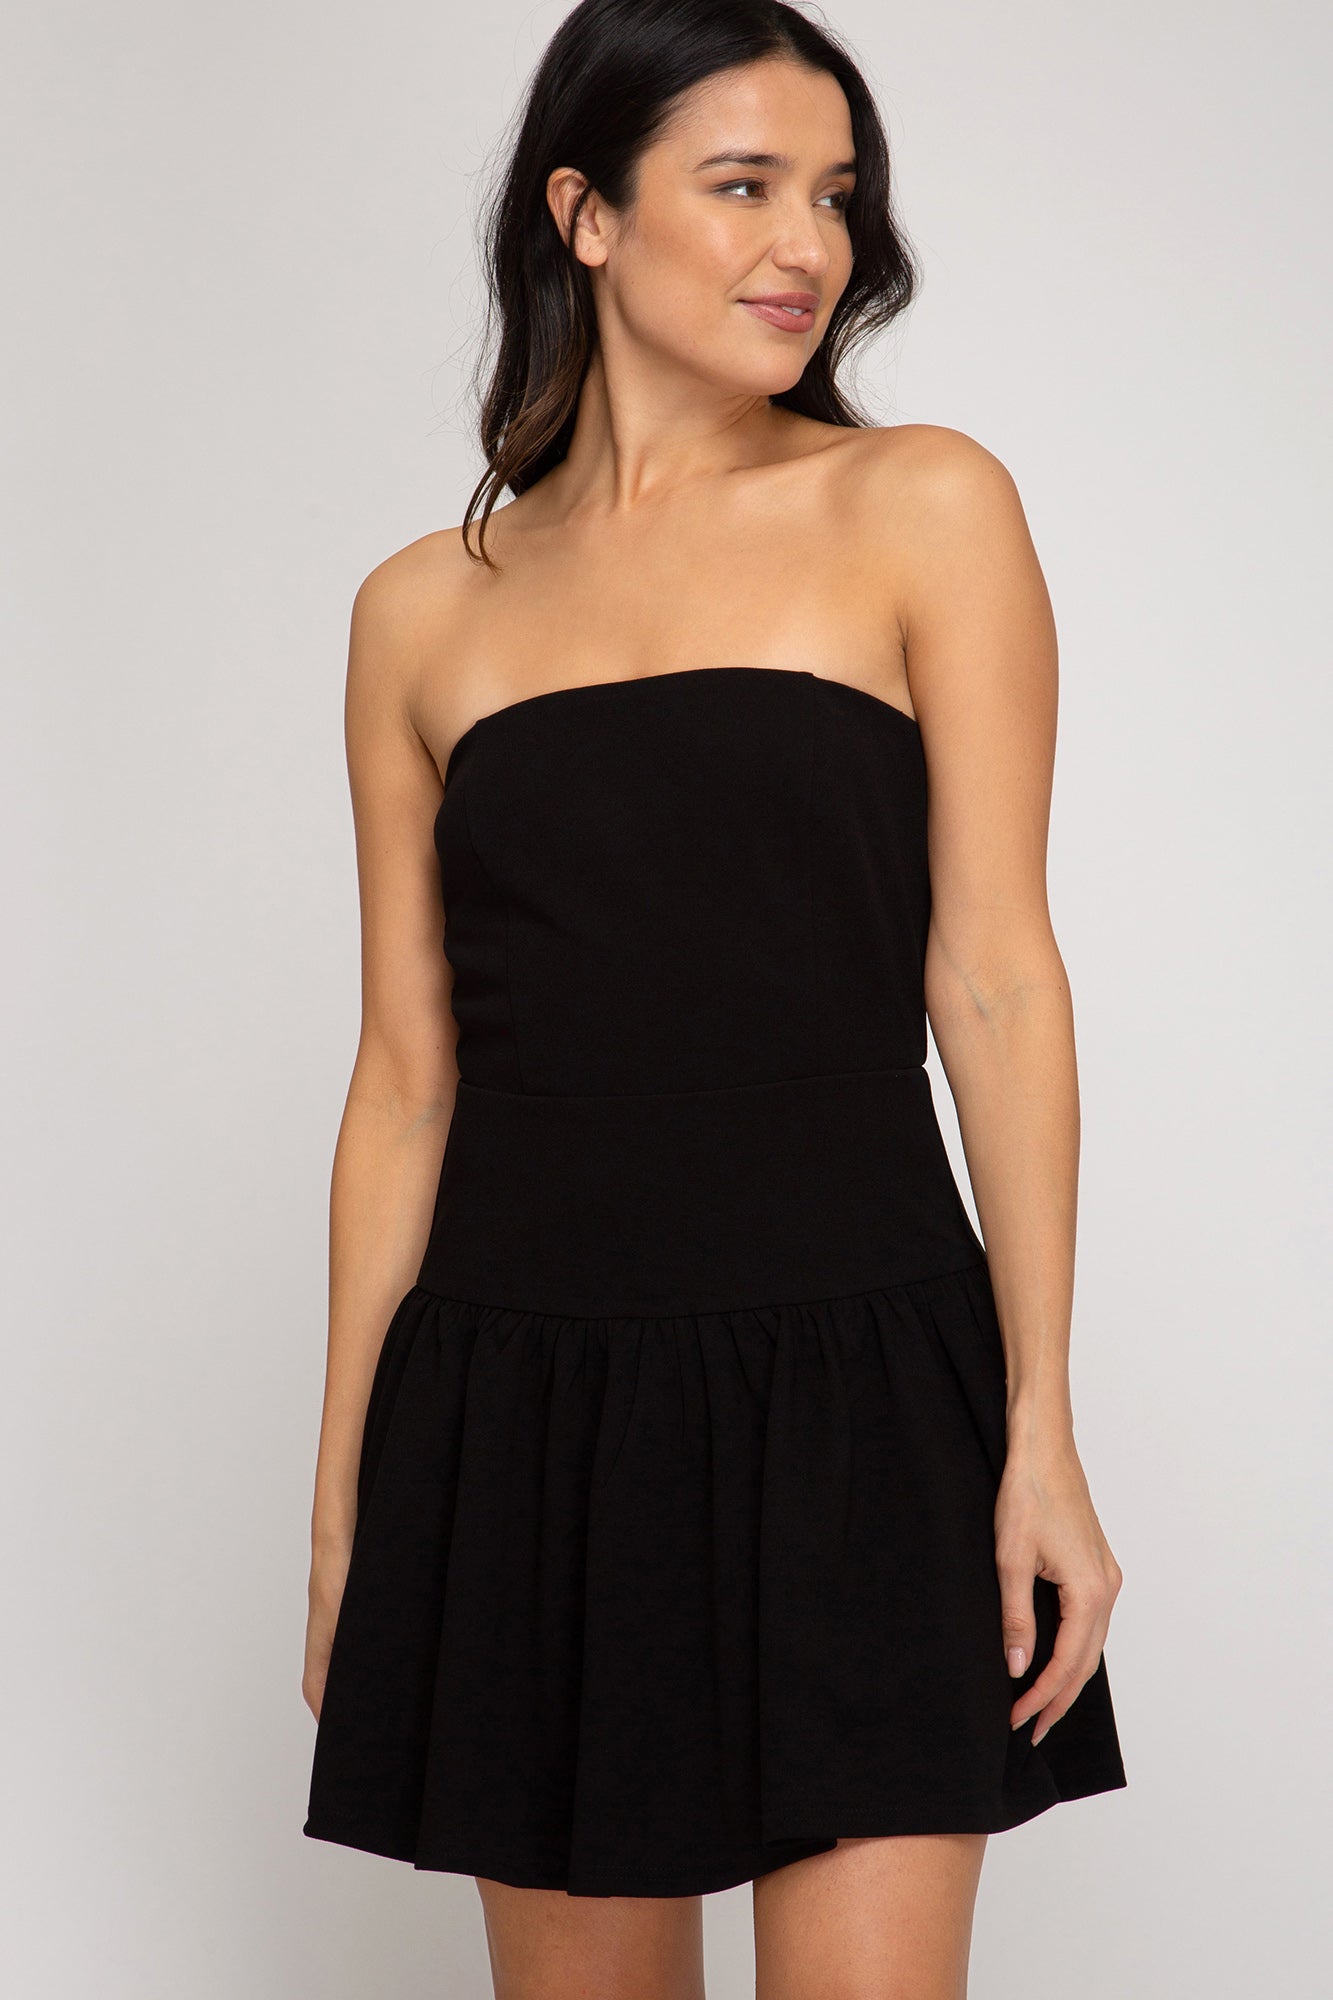 Tub Top Fitted Black Dress!